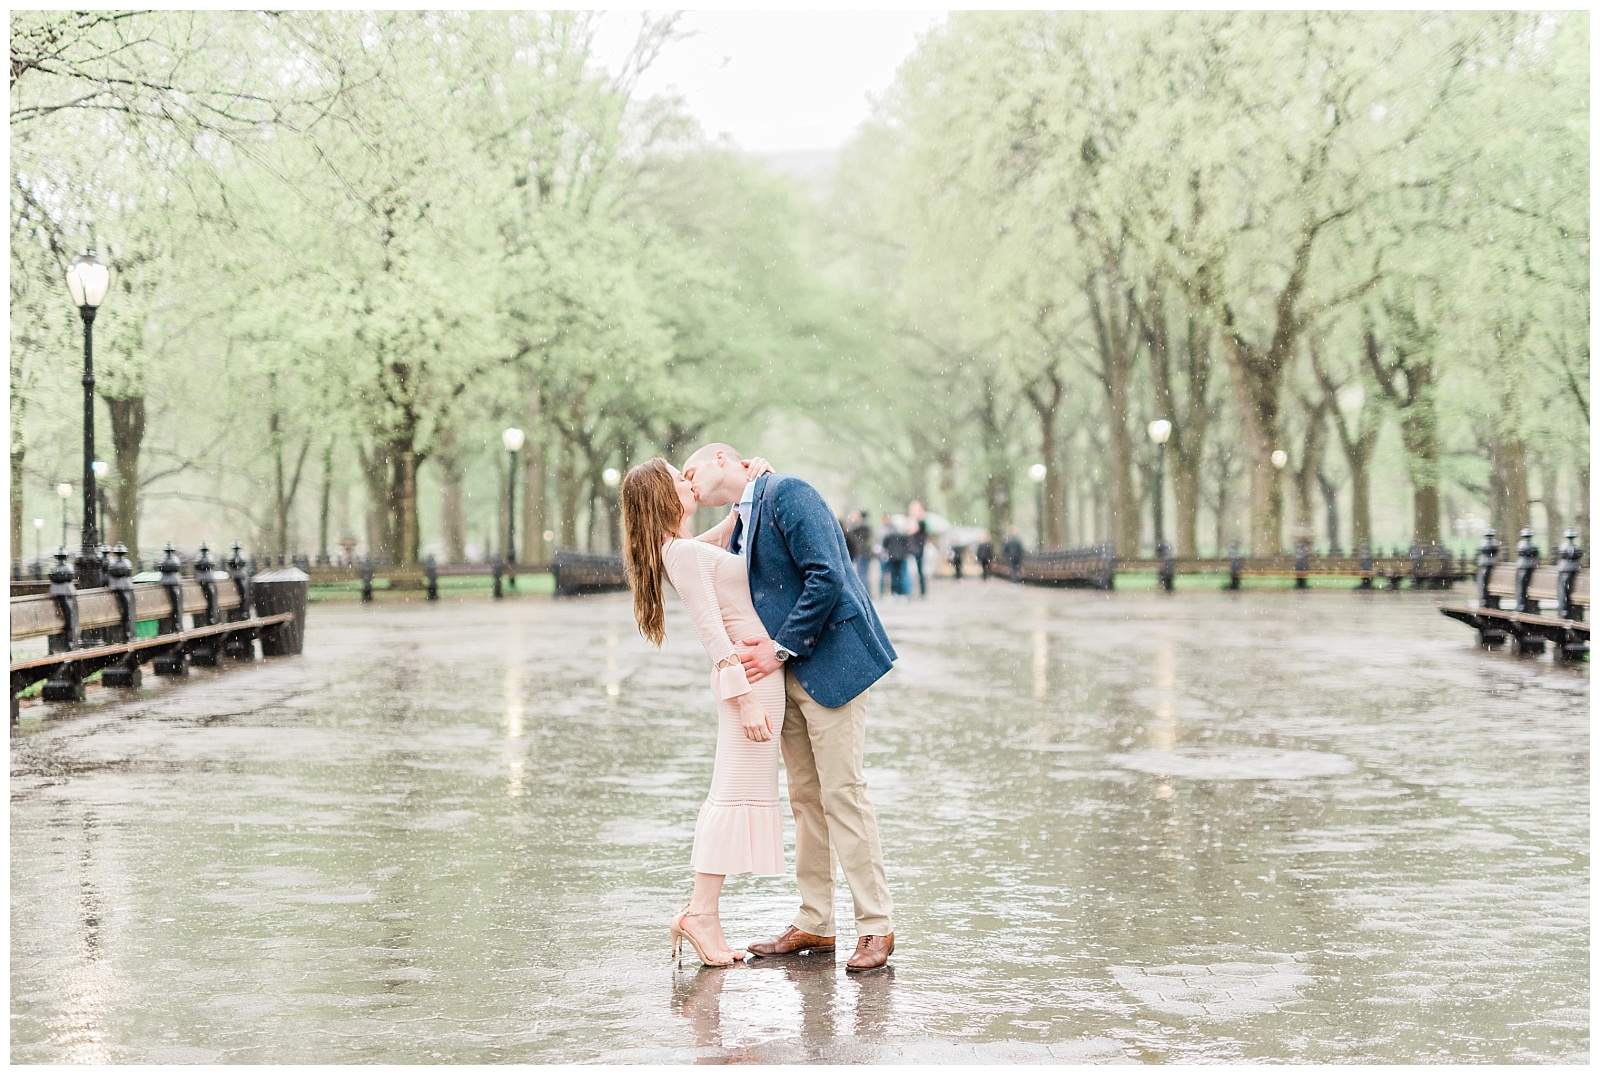 A man dips his fiance back for a romantic kiss in the rain in the Mall at a Central Park.